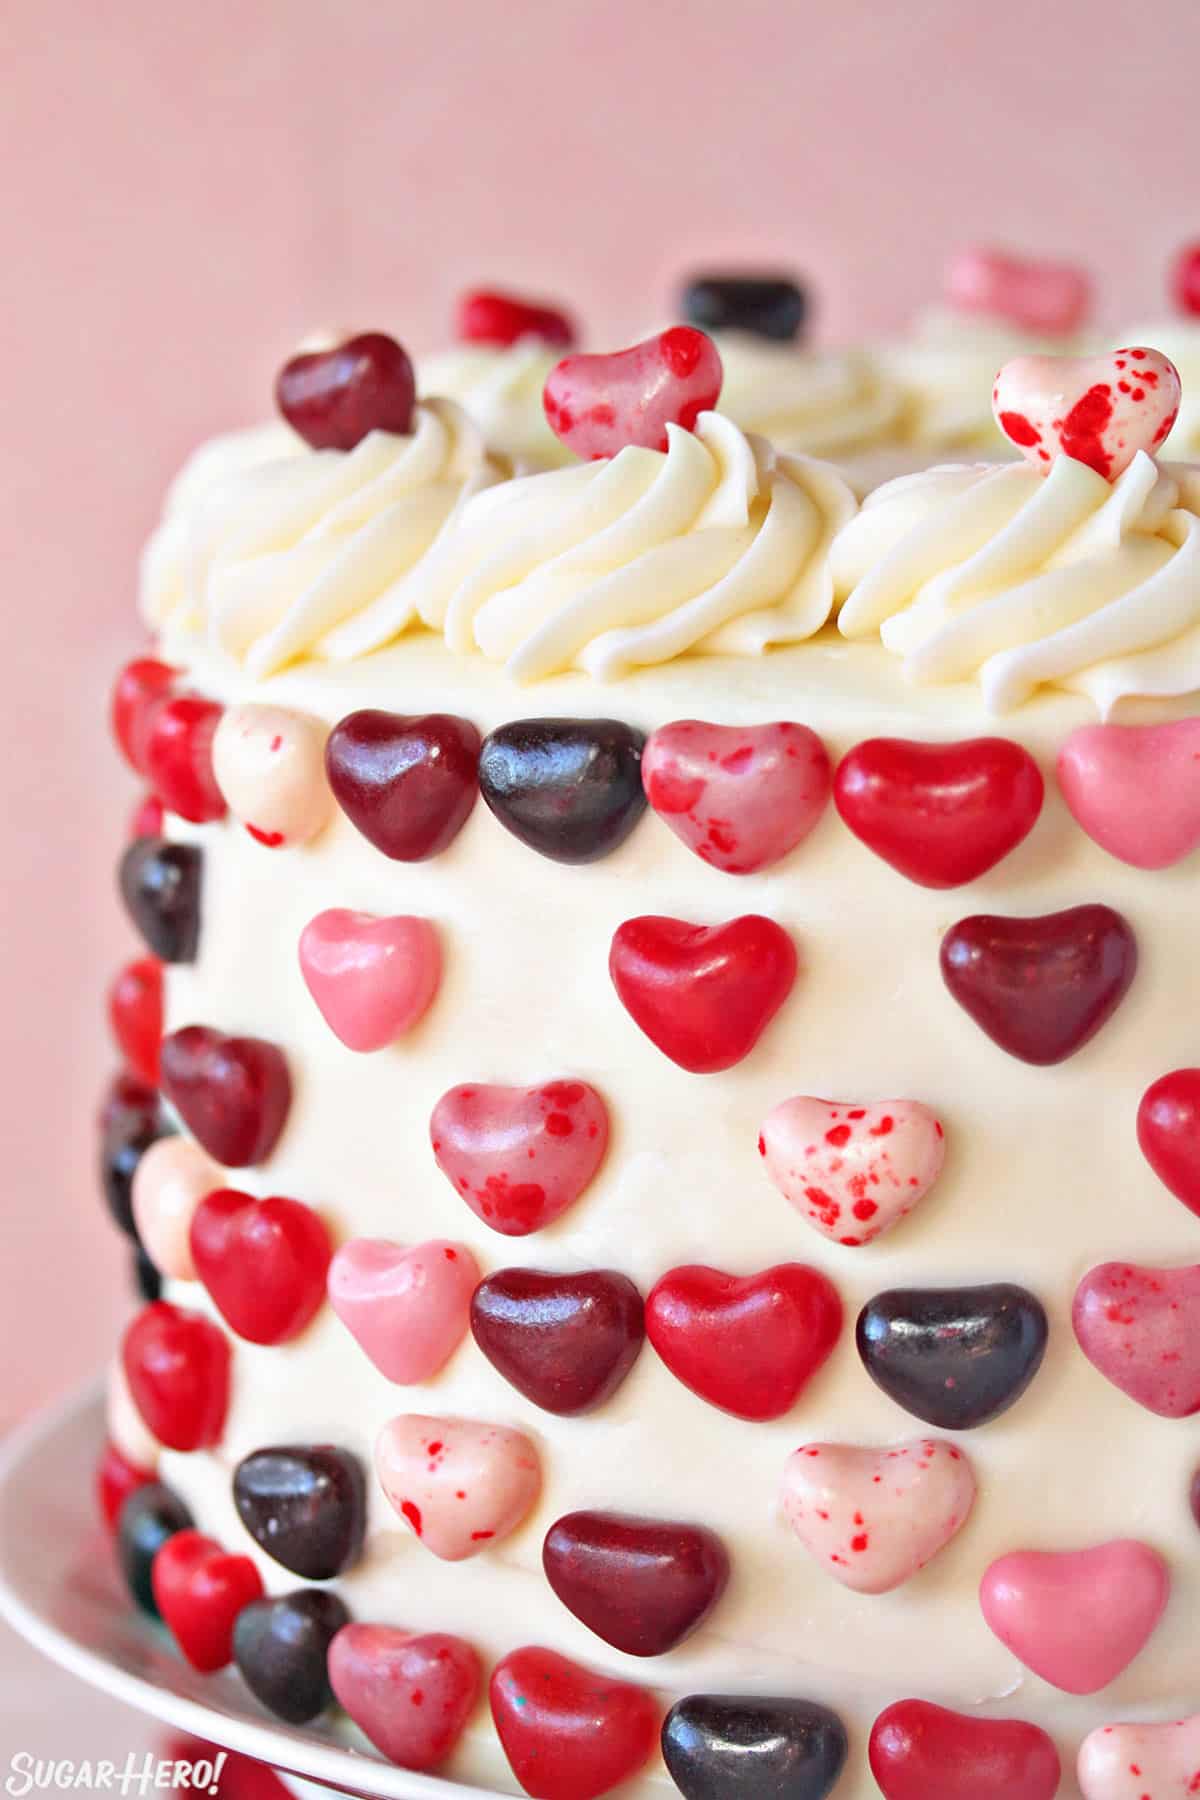 Close-up of the side of a cake, showing the cream cheese frosting and red and pink candy decorations.